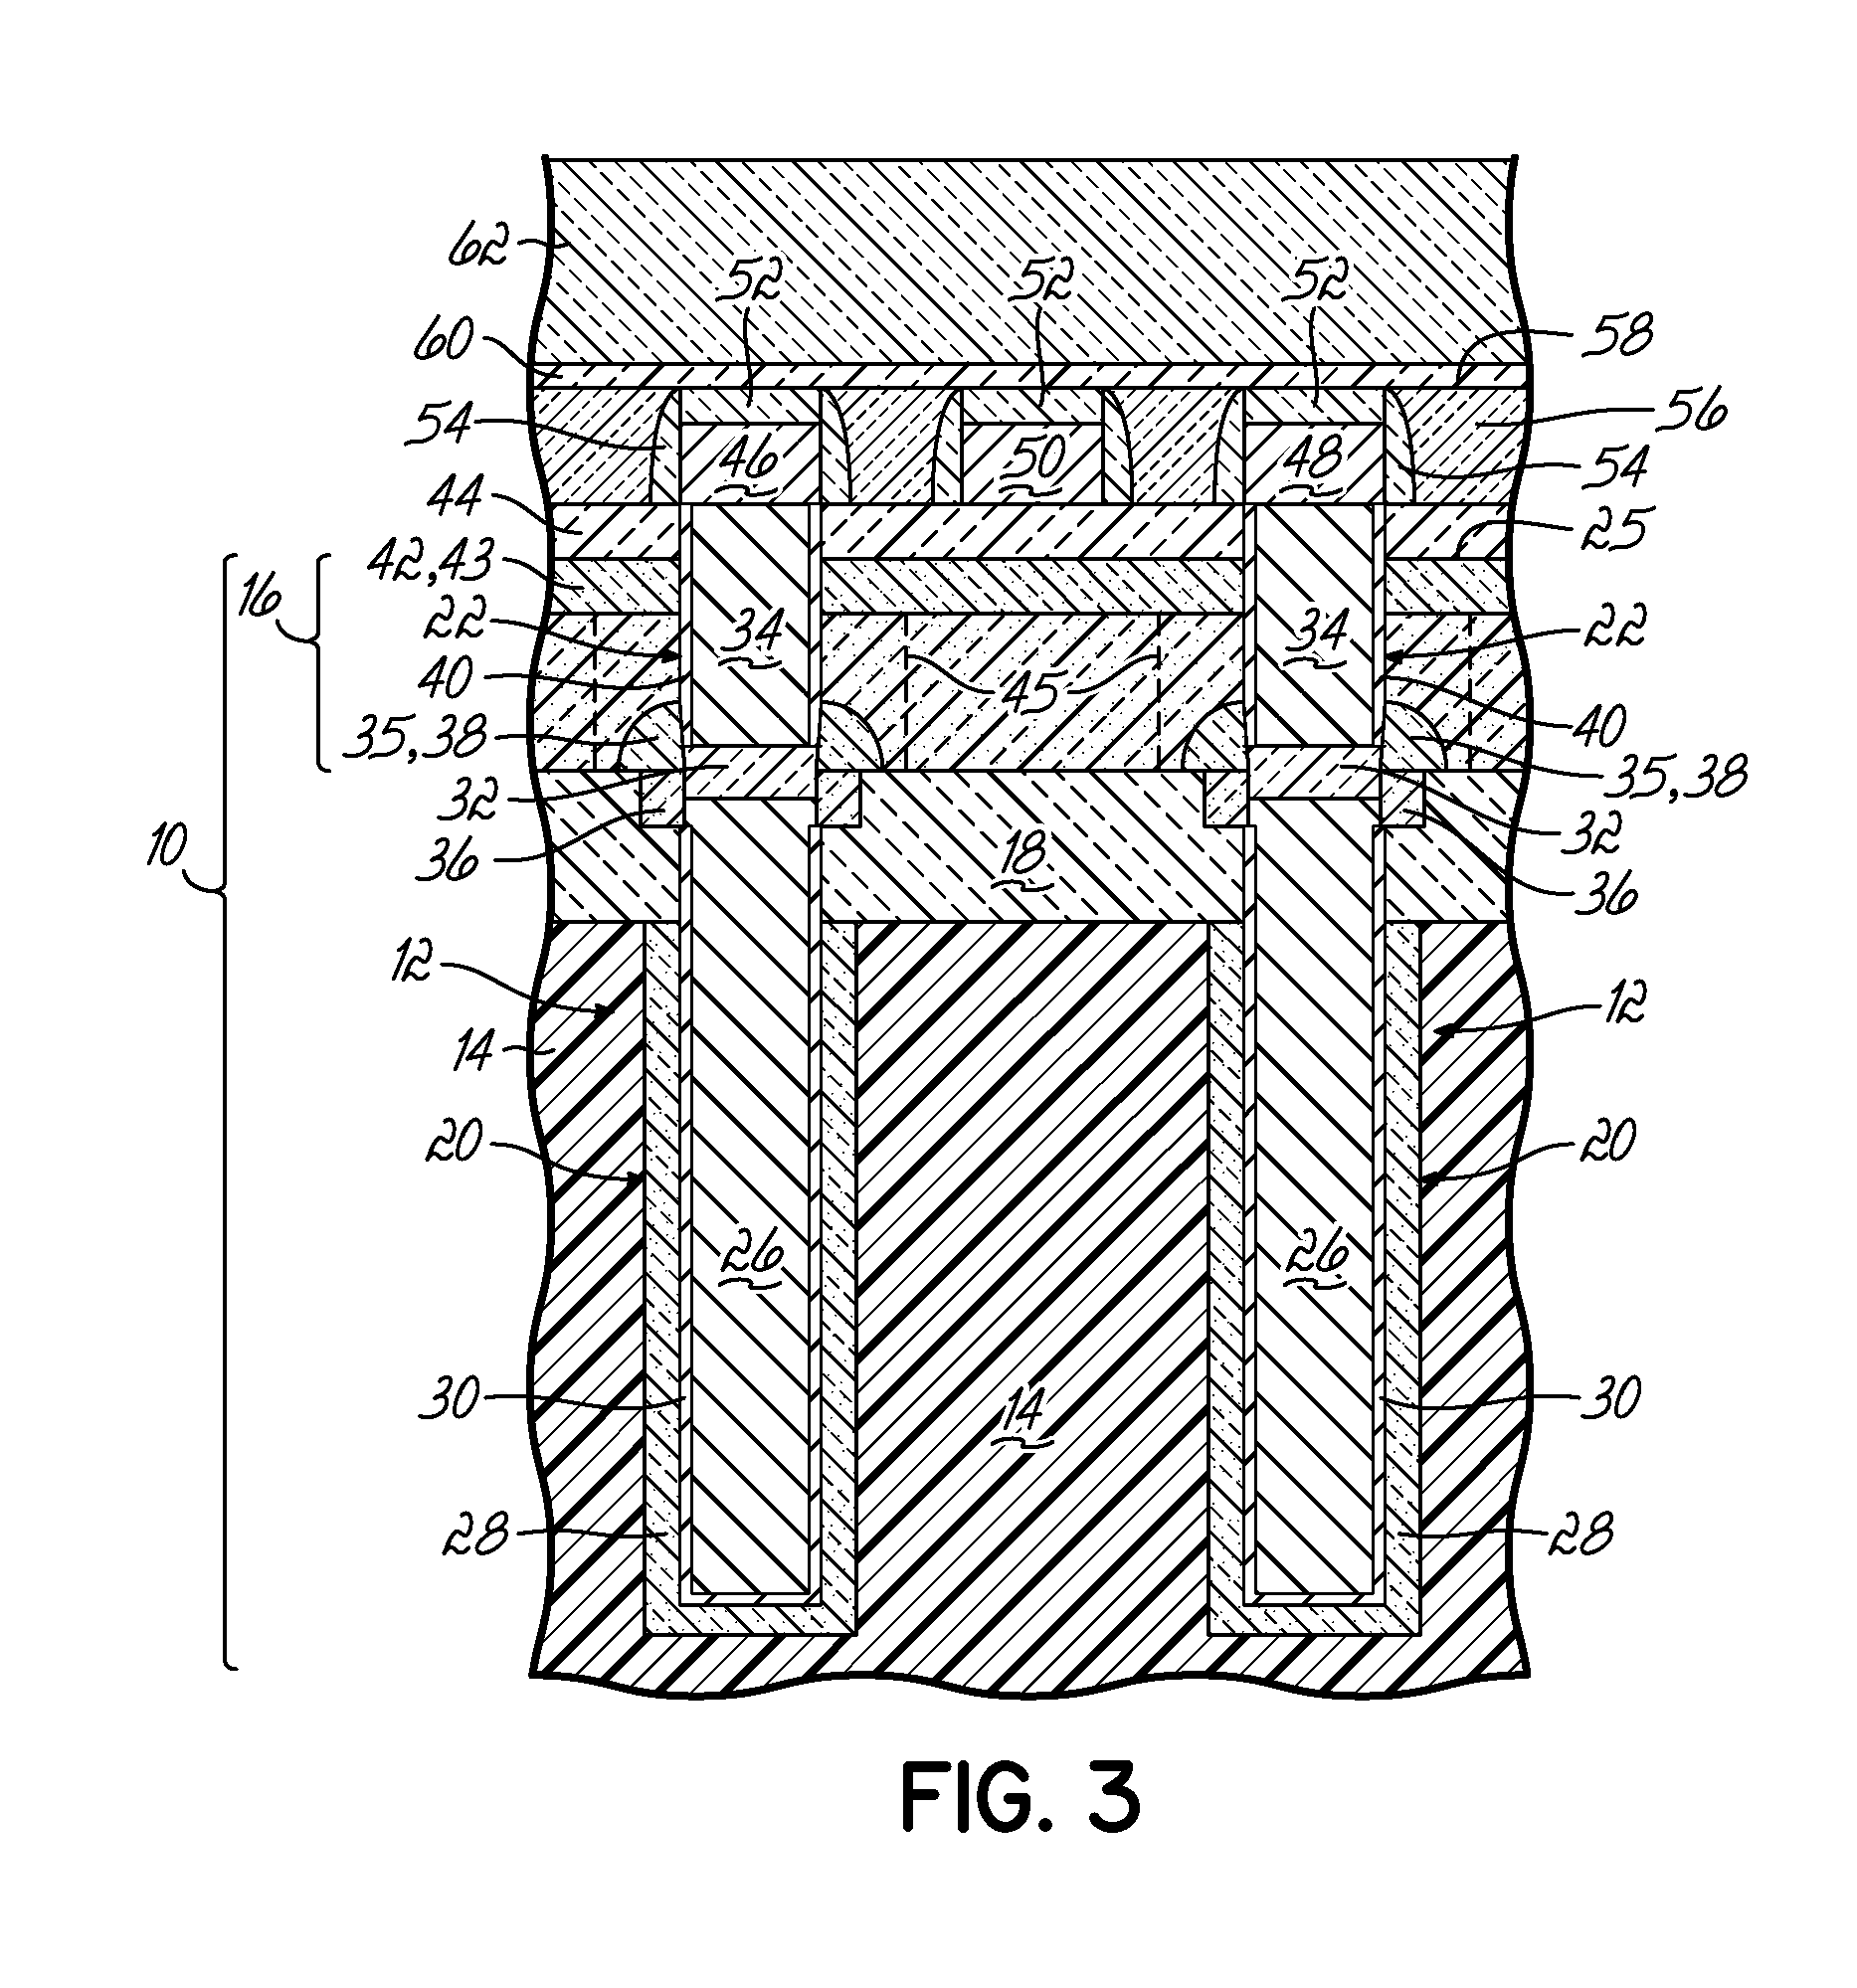 Body-contacted semiconductor structures and methods of fabricating such body-contacted semiconductor structures